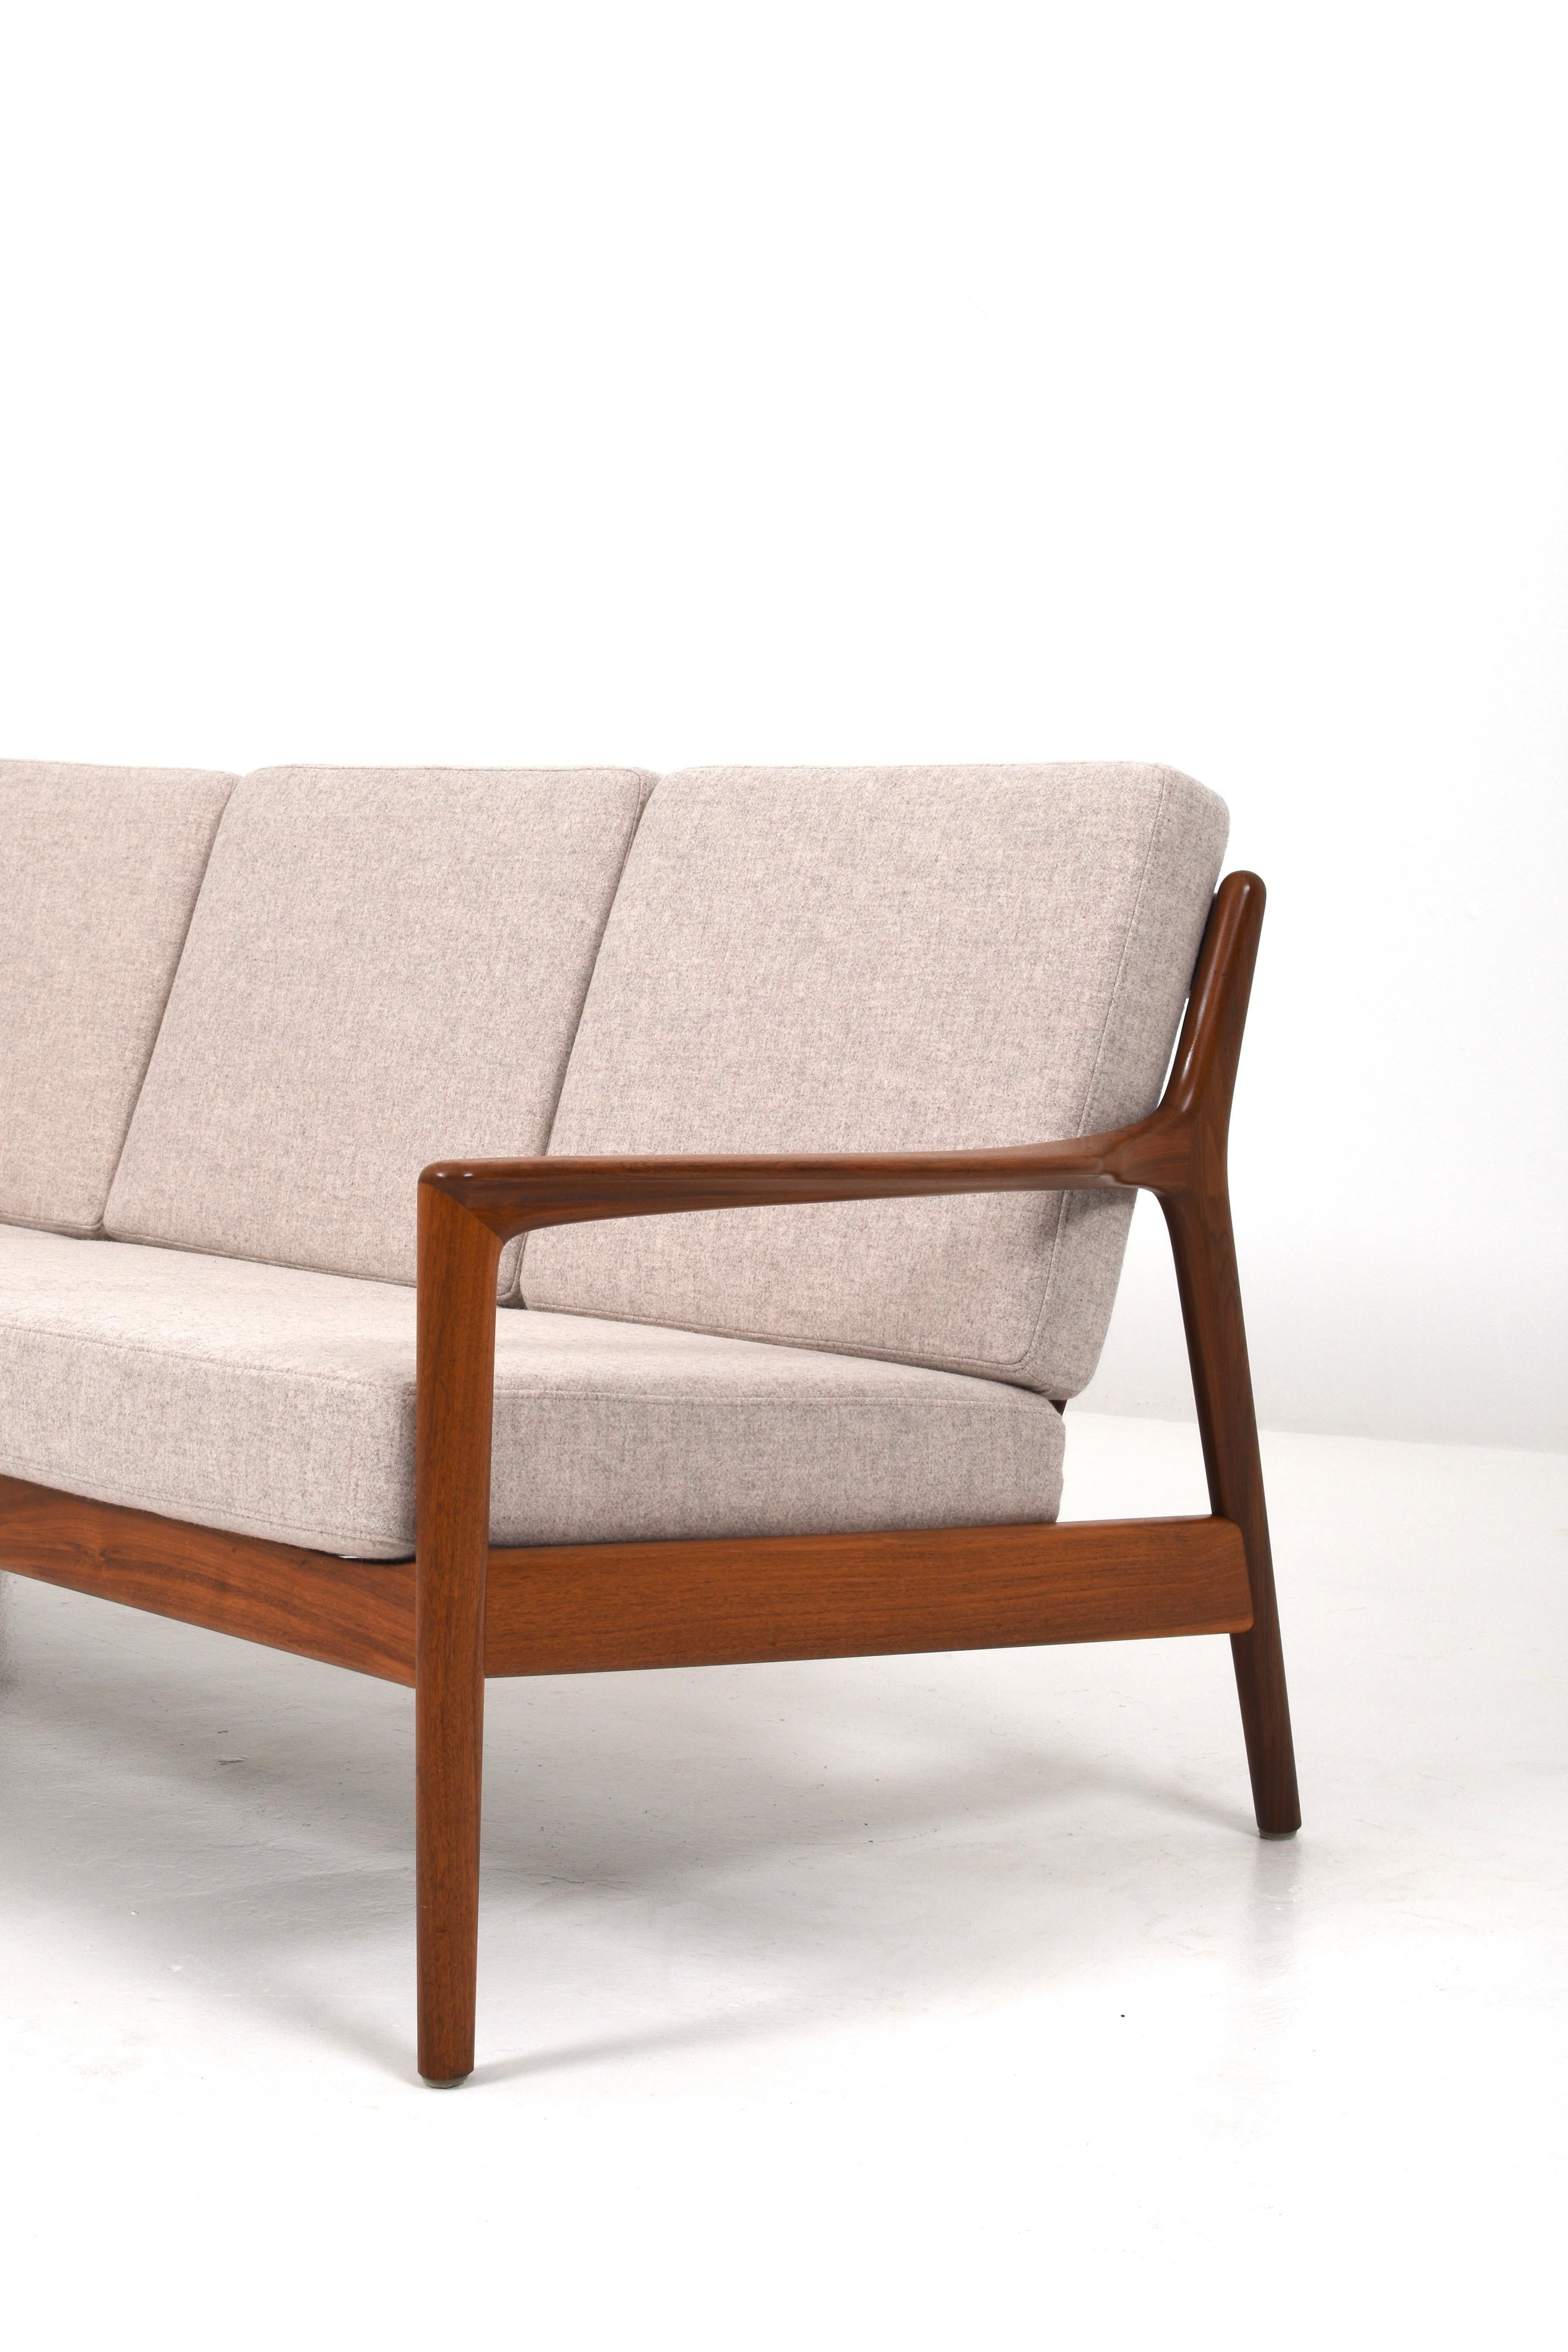 Wool Folke Ohlsson Sofa Model USA-75 Produced by Dux in Sweden For Sale